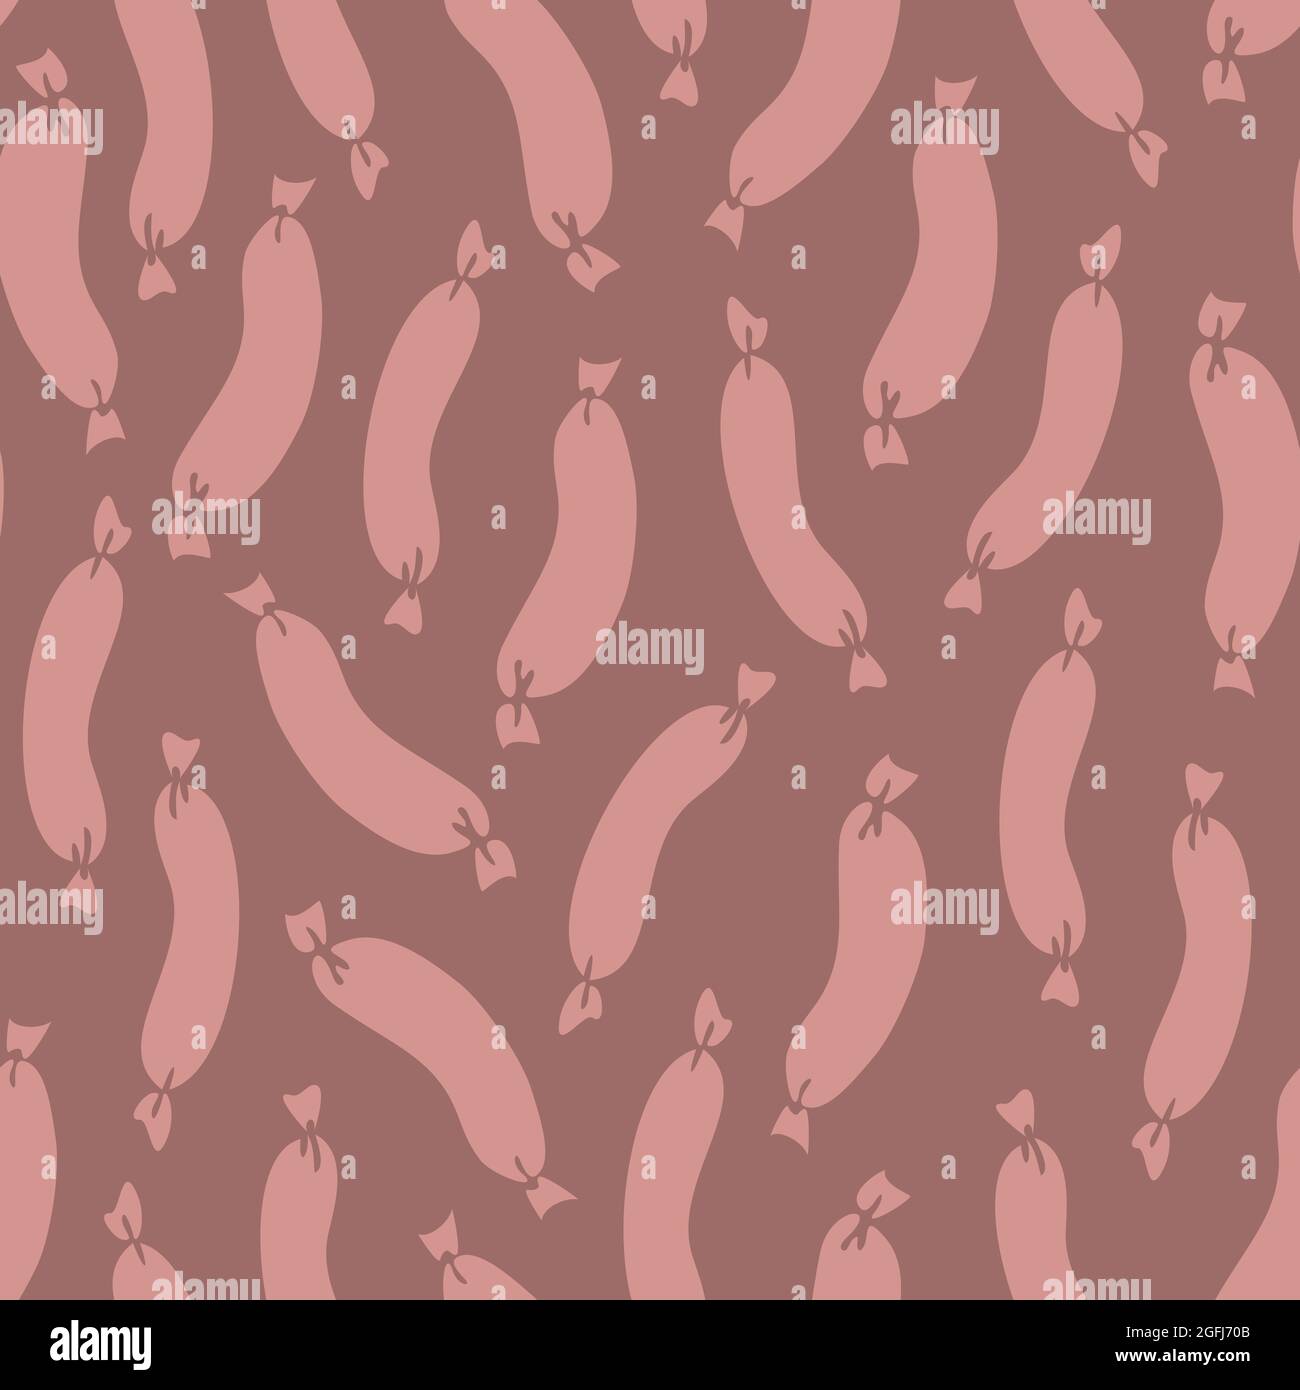 Vector seamless pattern with sausages. Design with silhouettes of sausages. Stock Vector